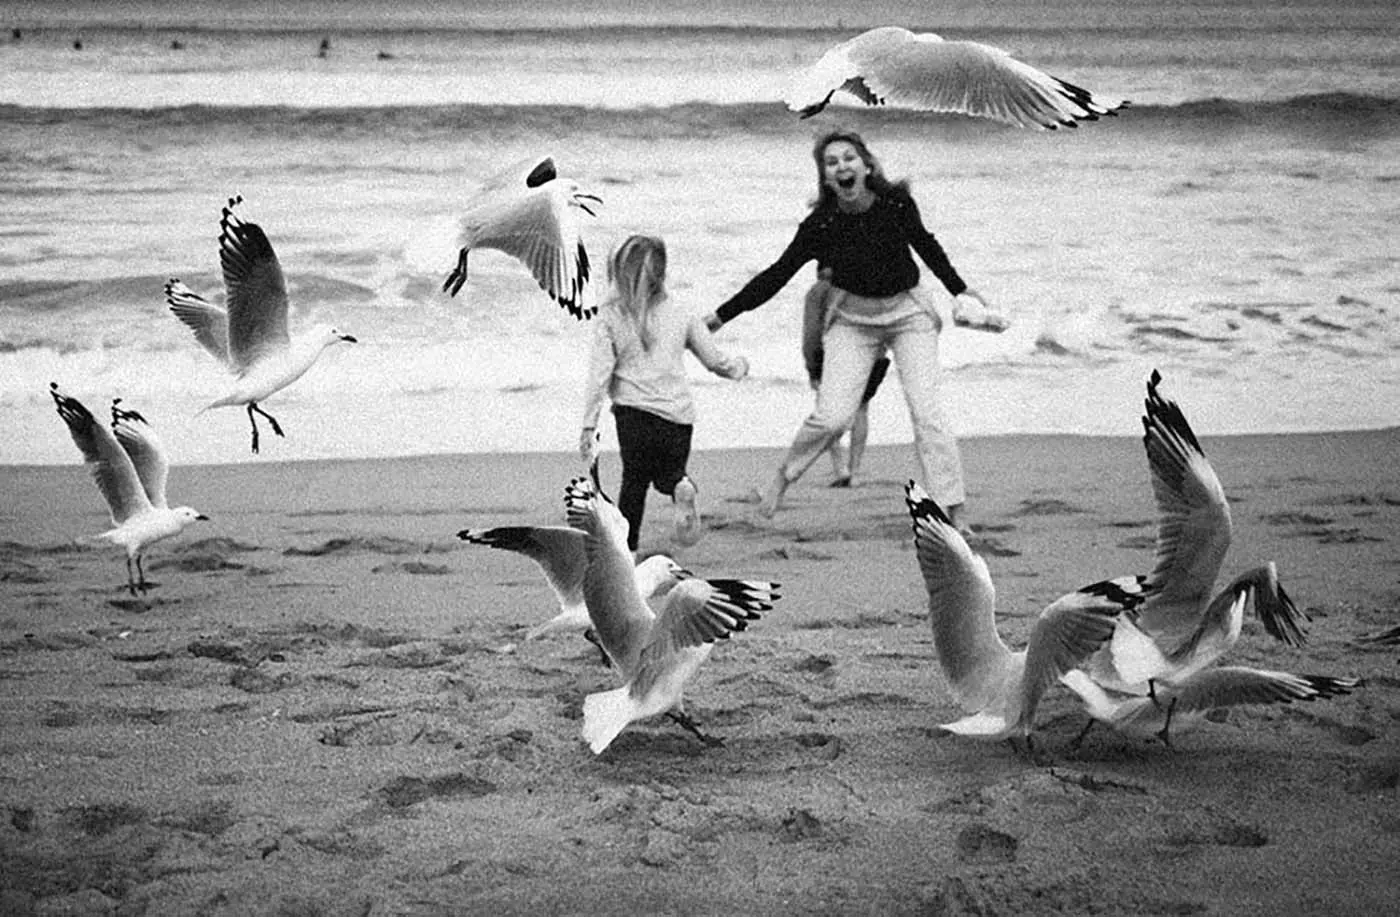 Mother and daughter playing on a beach among seagulls - photo in black and white by Anastasia Prodous.